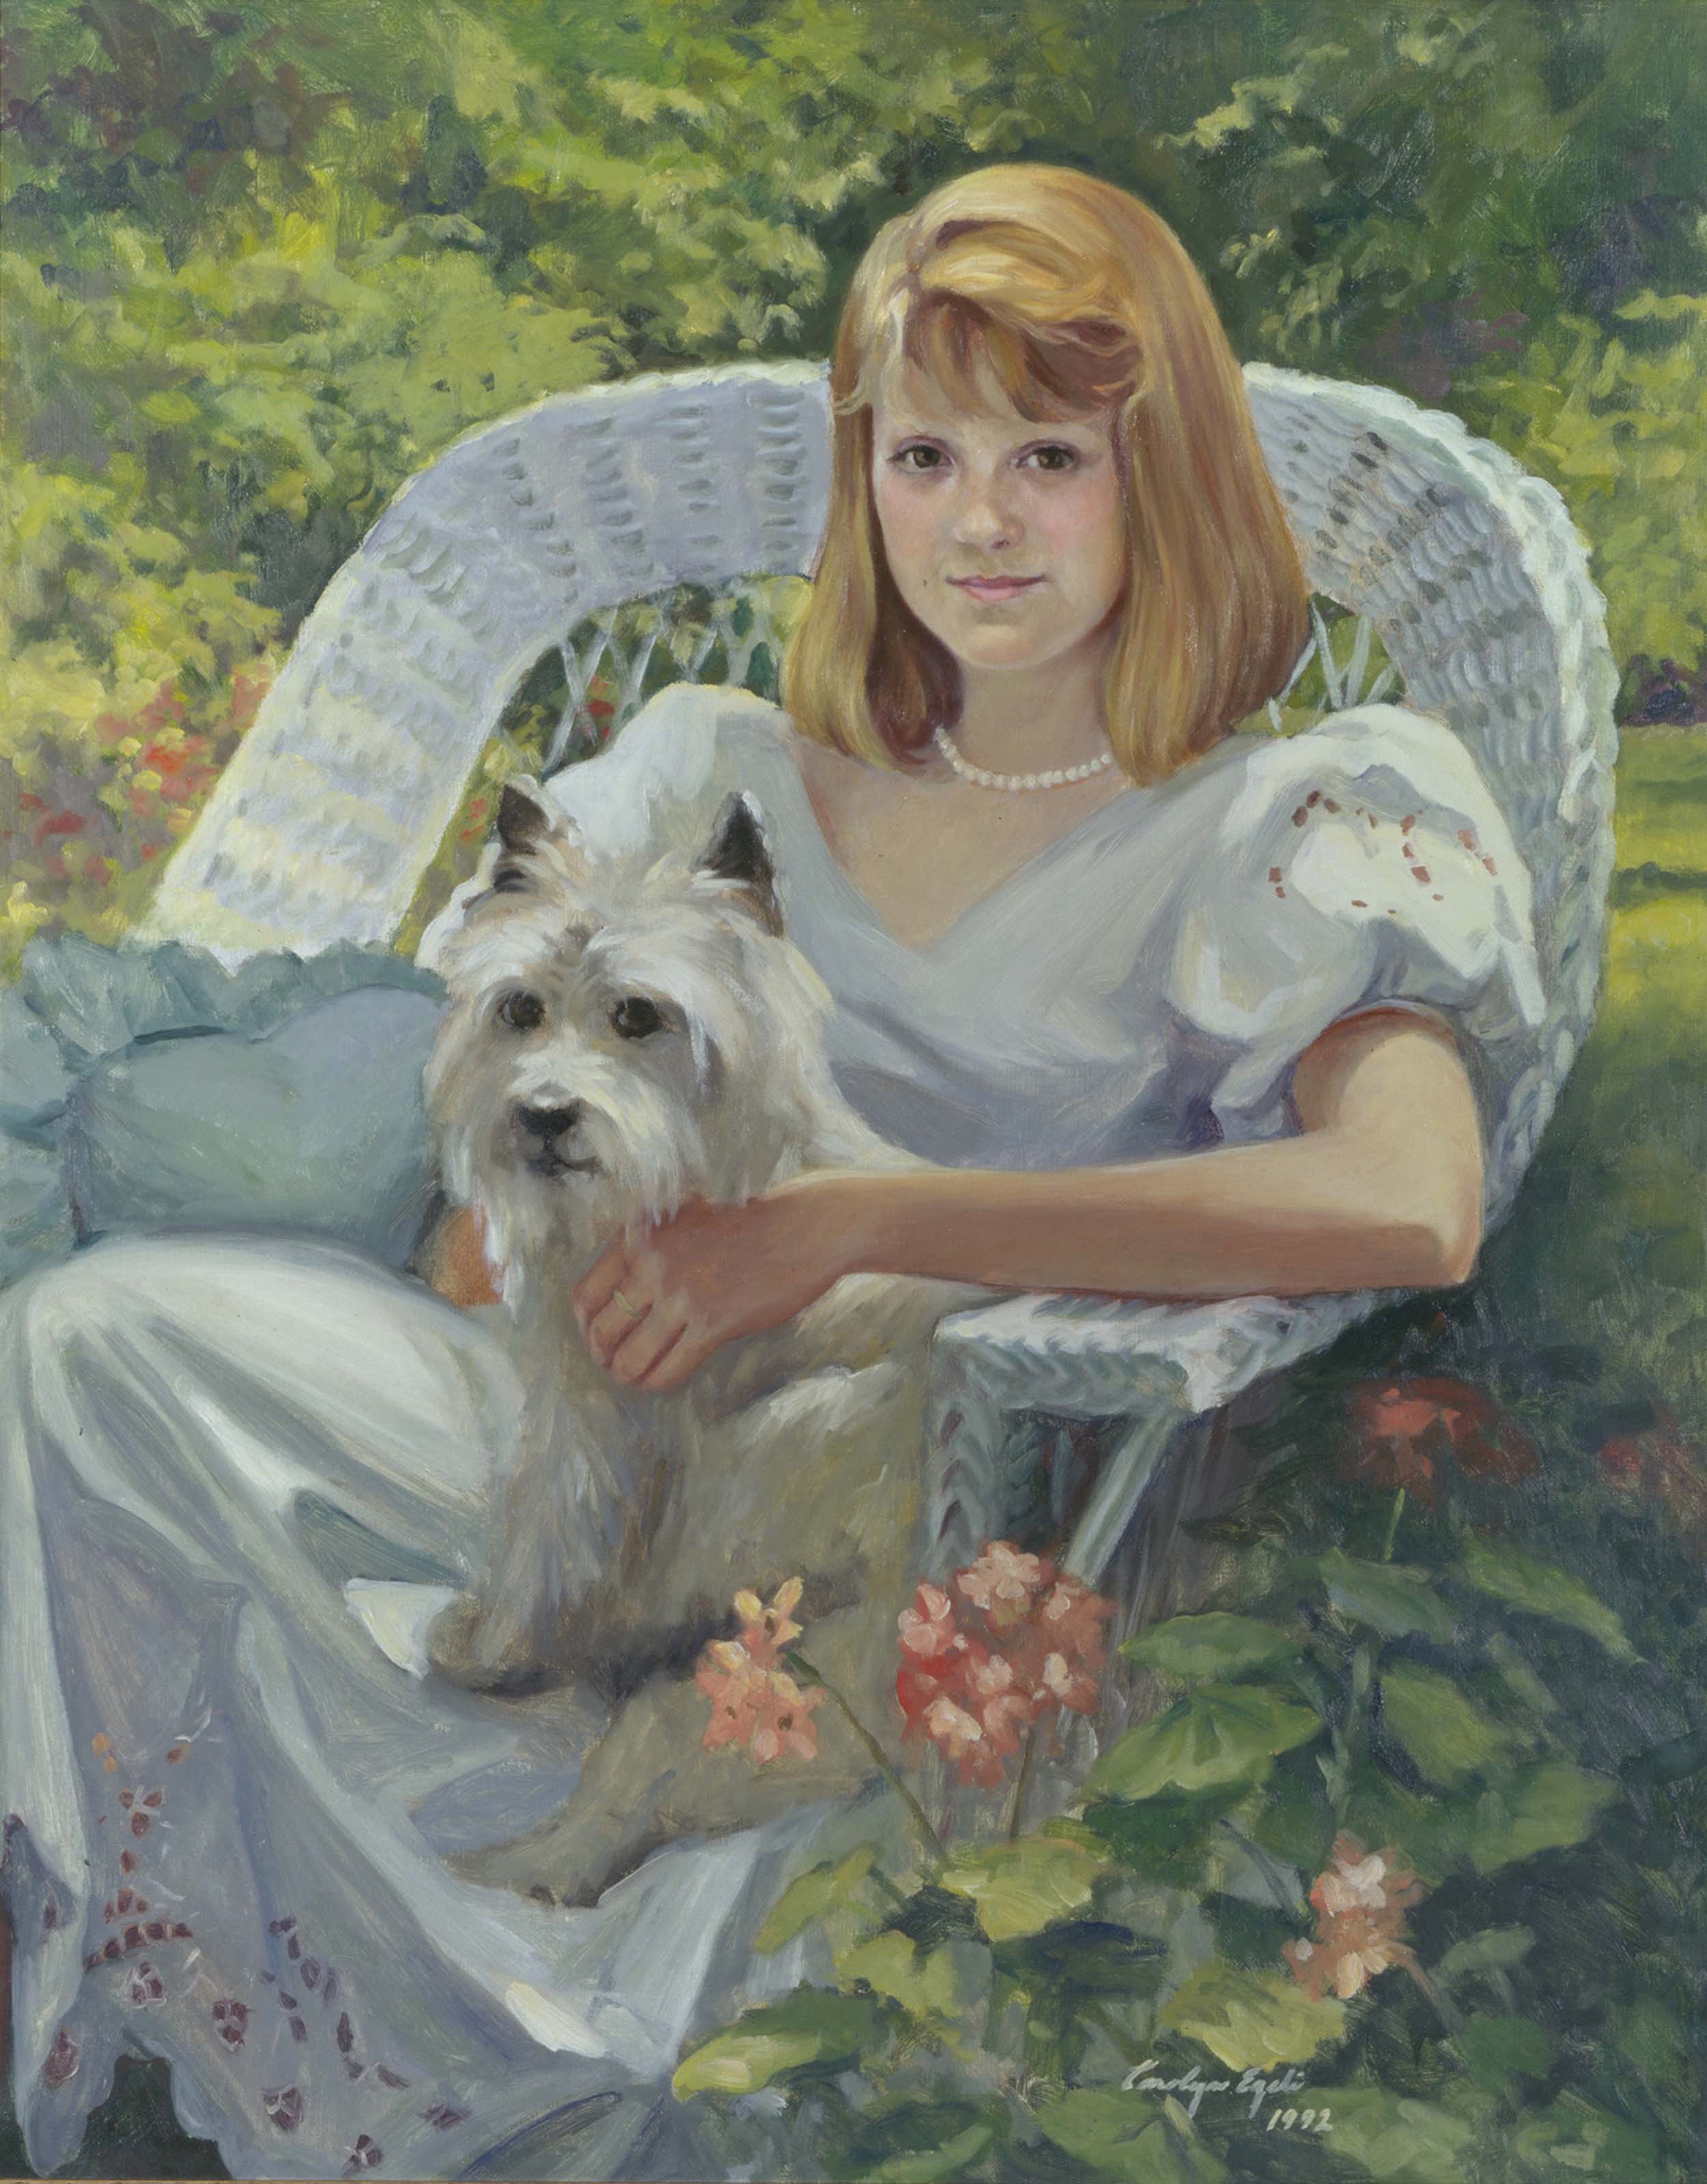 Girl in Wicker Chair. 32" x 38". Commission